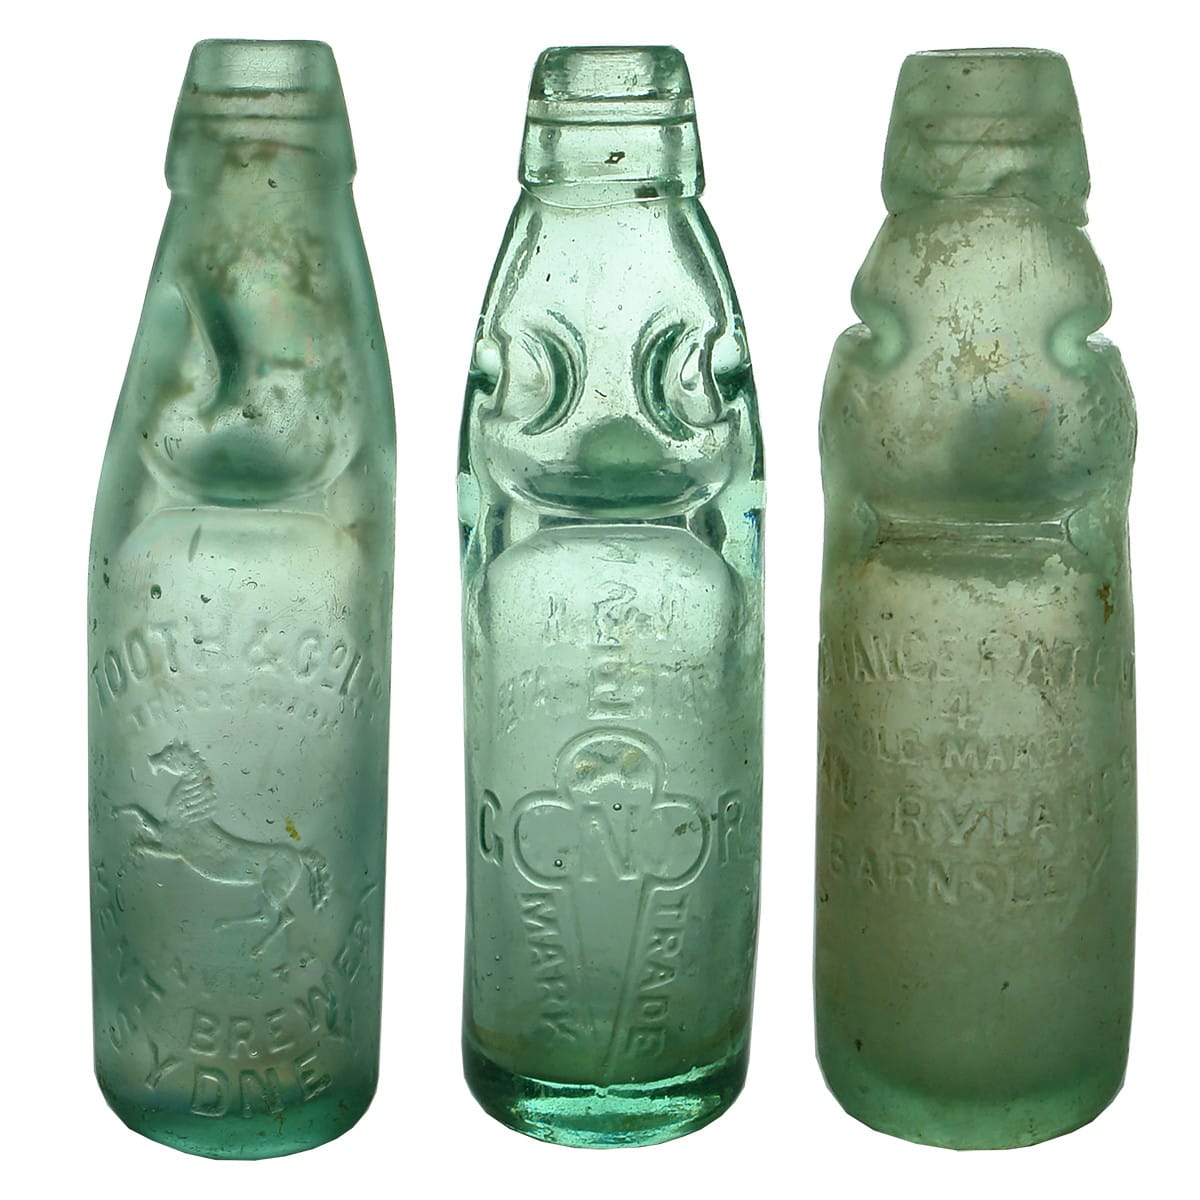 Three 6 oz Marble Bottles: Tooth & Co., Sydney; NSW Aerated Water, Newcastle; Dan Rylands Reliance Patent. (New South Wales)